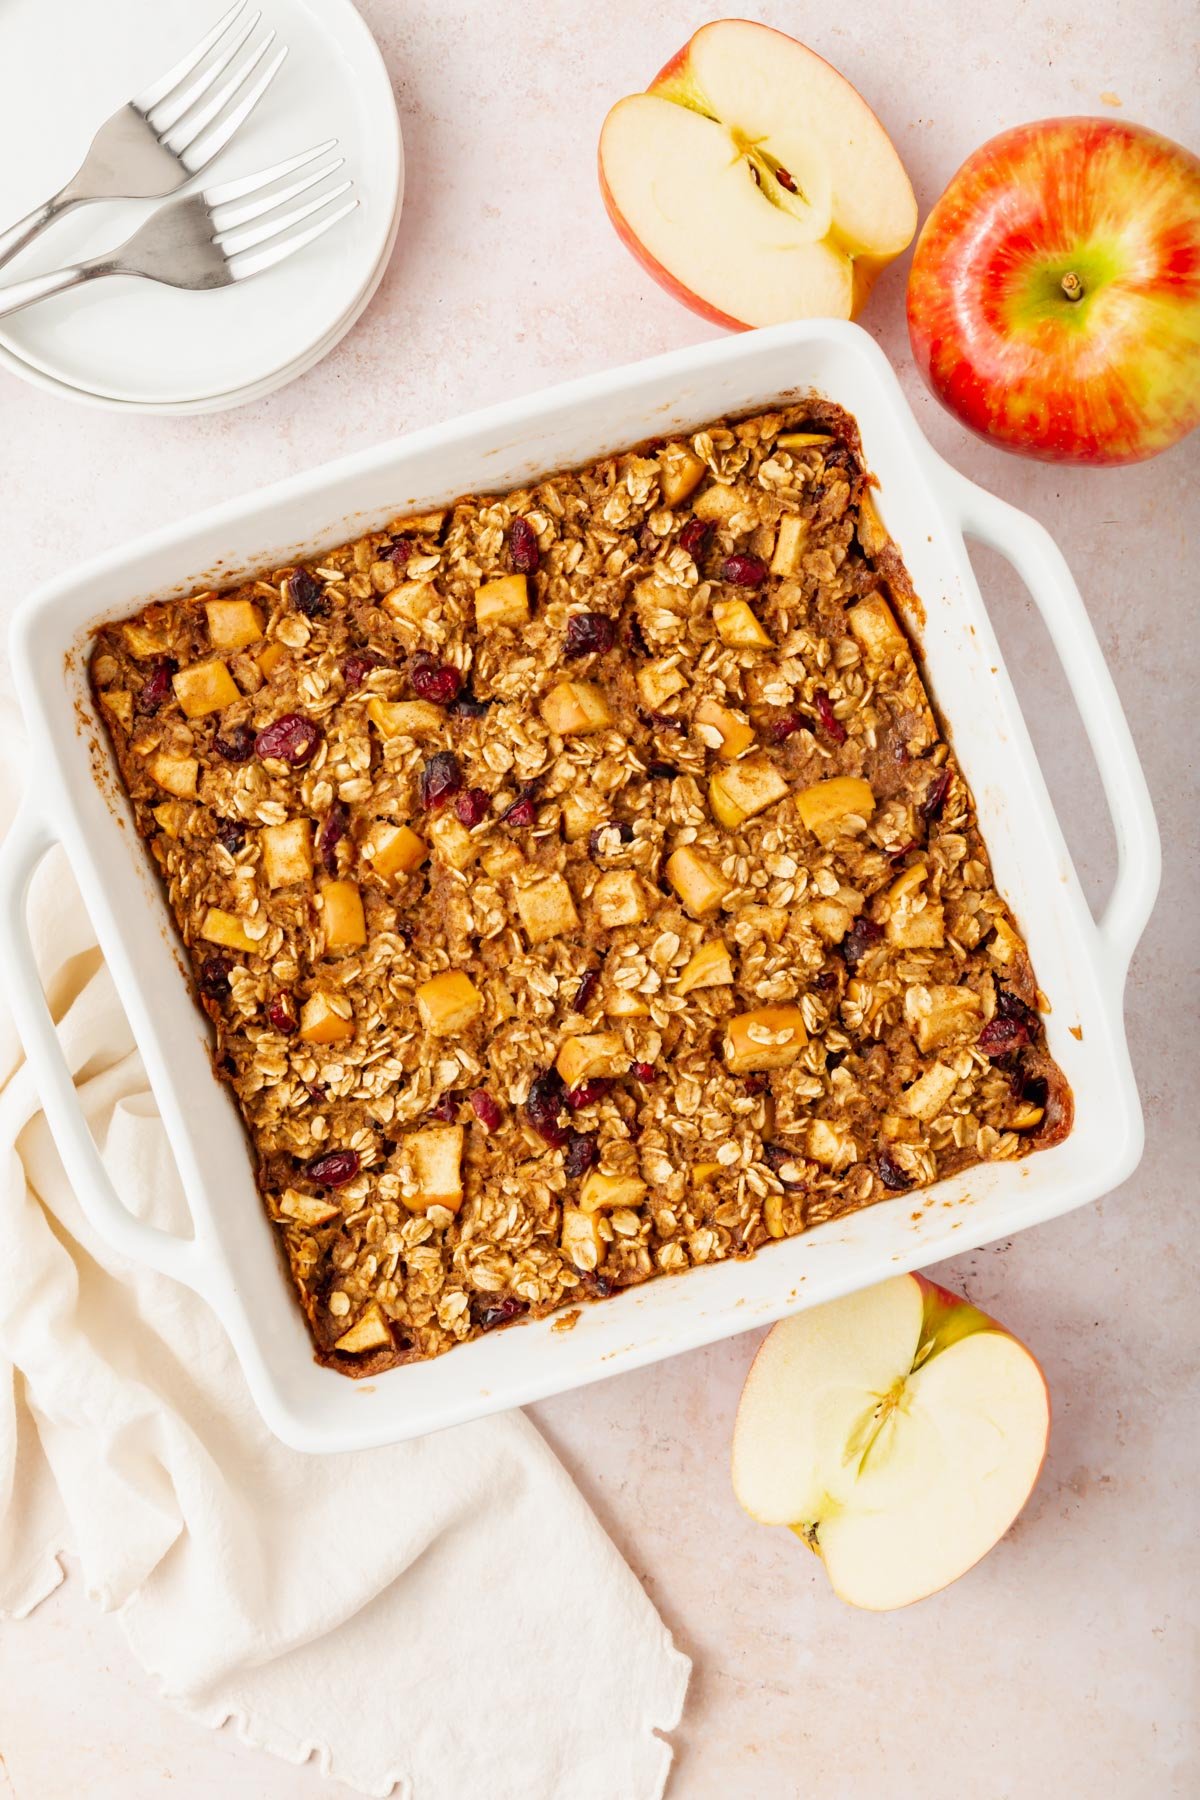 A tray of gluten-free vegan apple baked oatmeal next to a couple of apples on a table.